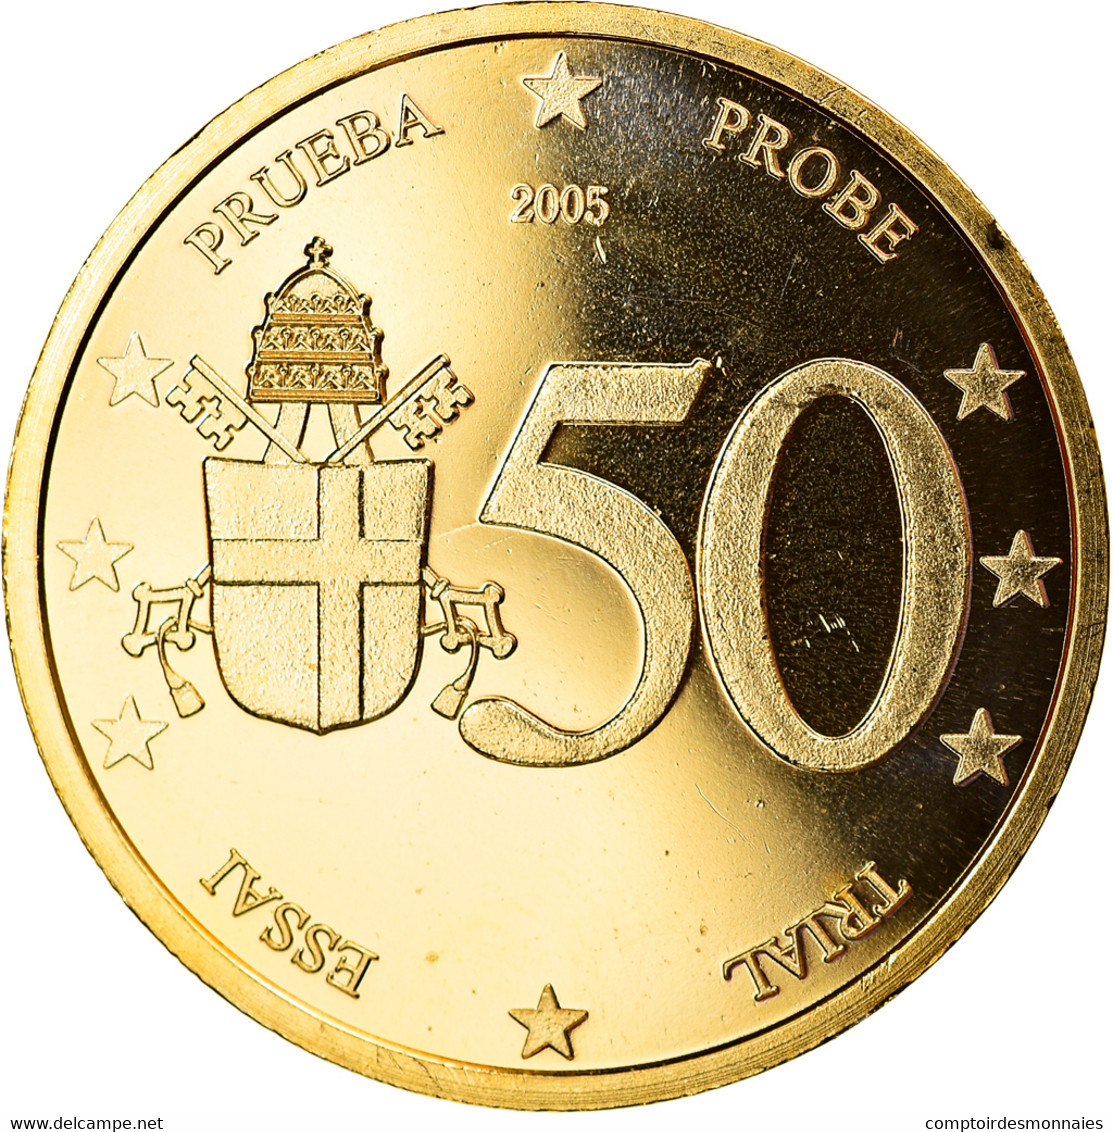 Vatican, 50 Euro Cent, Type 2, 2005, Unofficial Private Coin, FDC, Laiton - Private Proofs / Unofficial